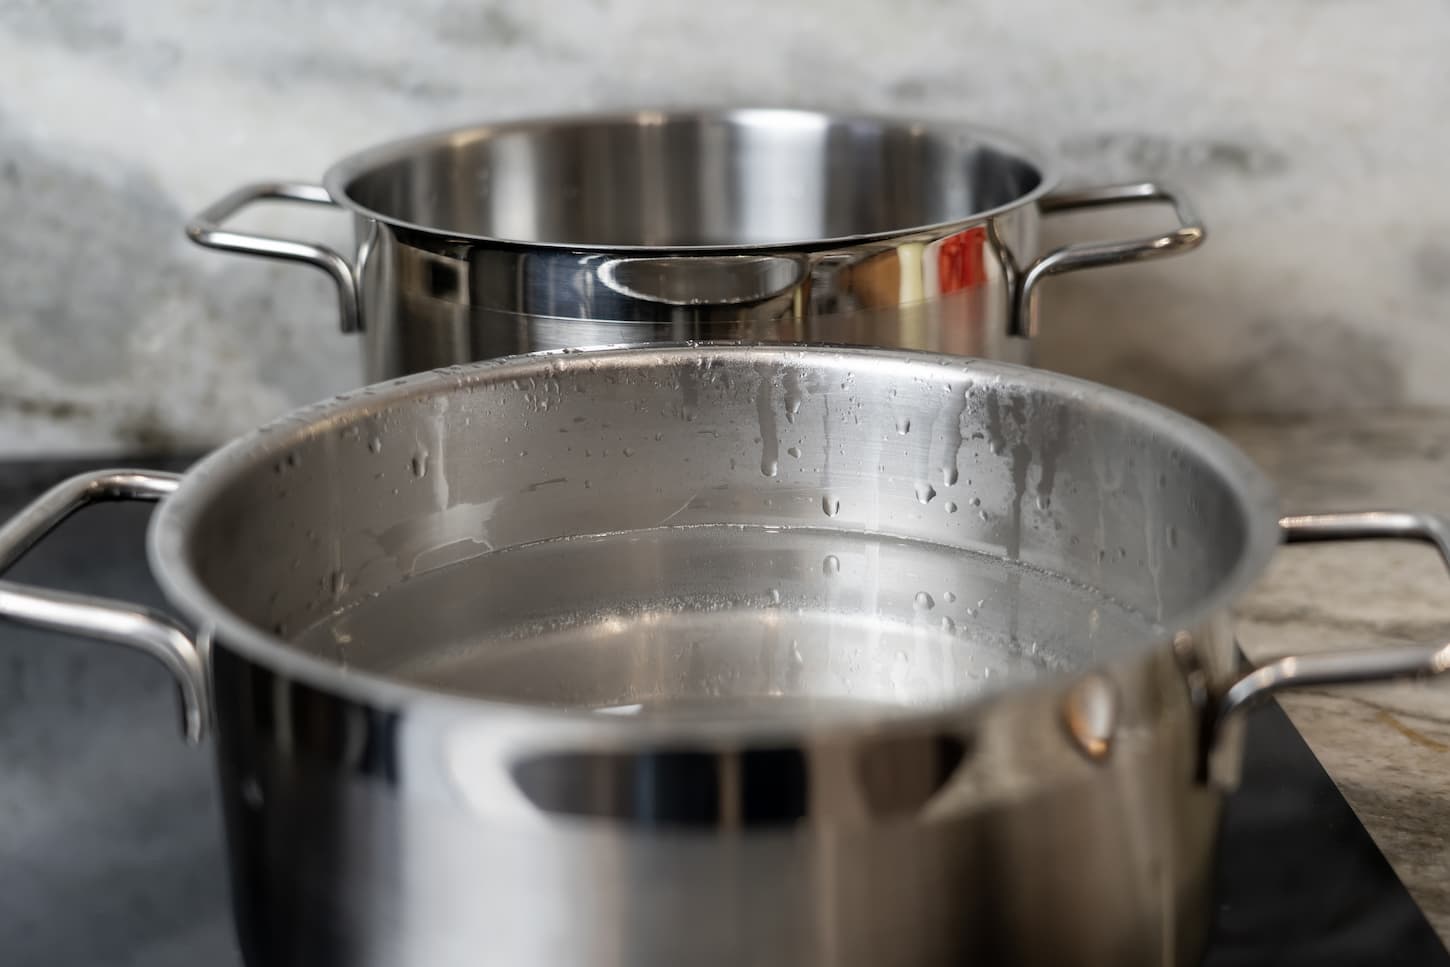 An image of Stainless steel pots filled with water on a black ceramic hob and marble countertop.